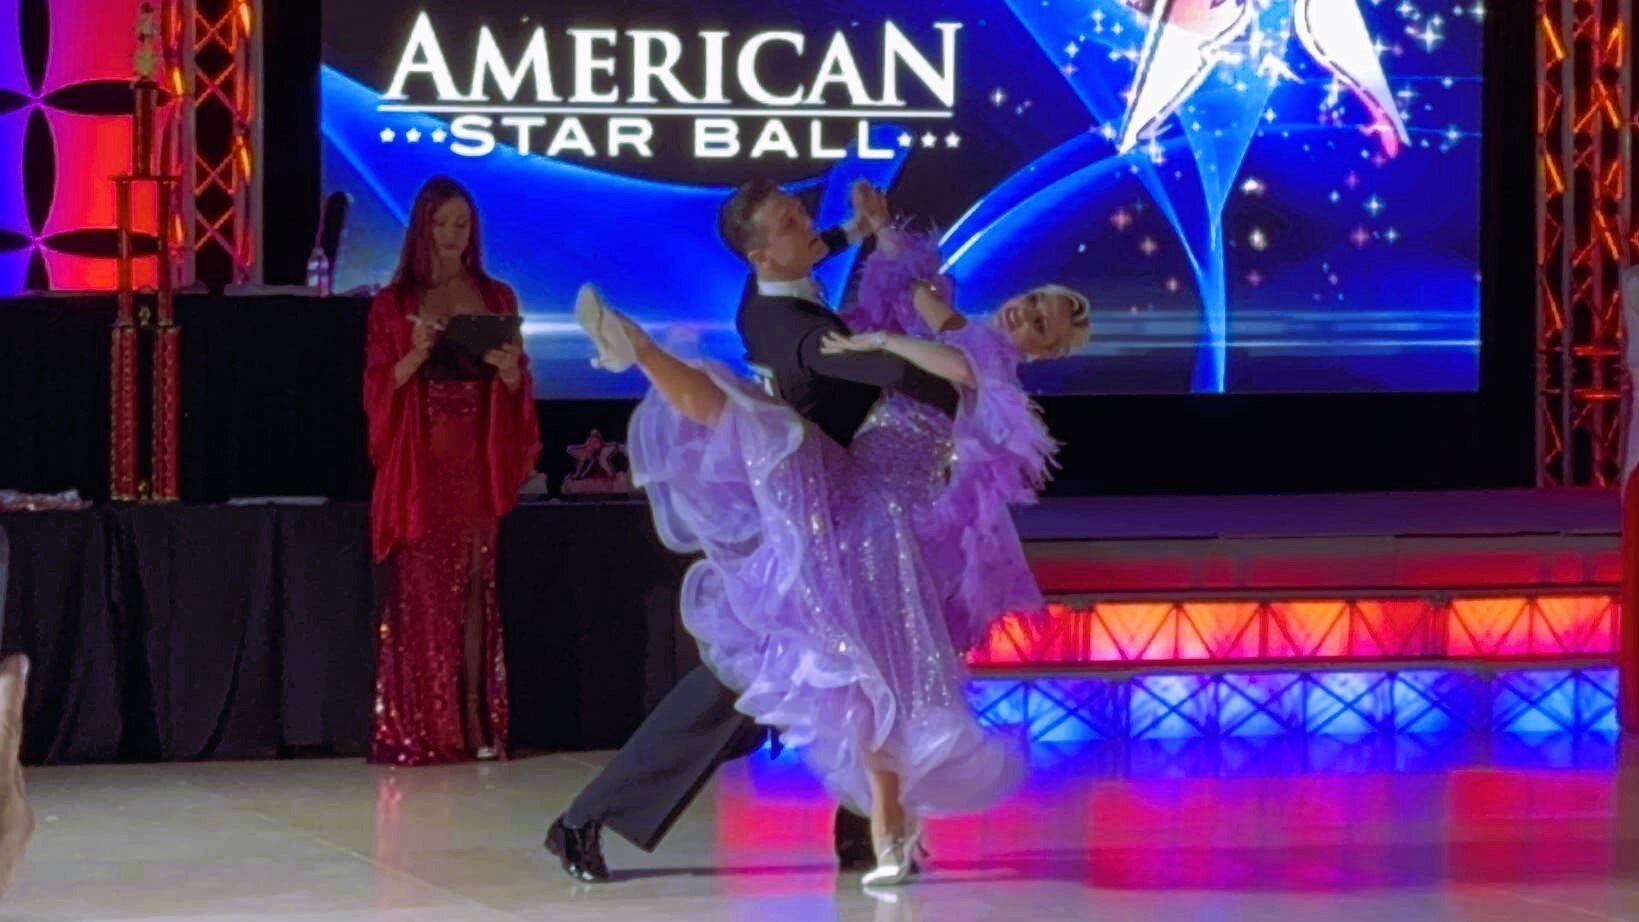 Image for the blog: American Star Ball Championships